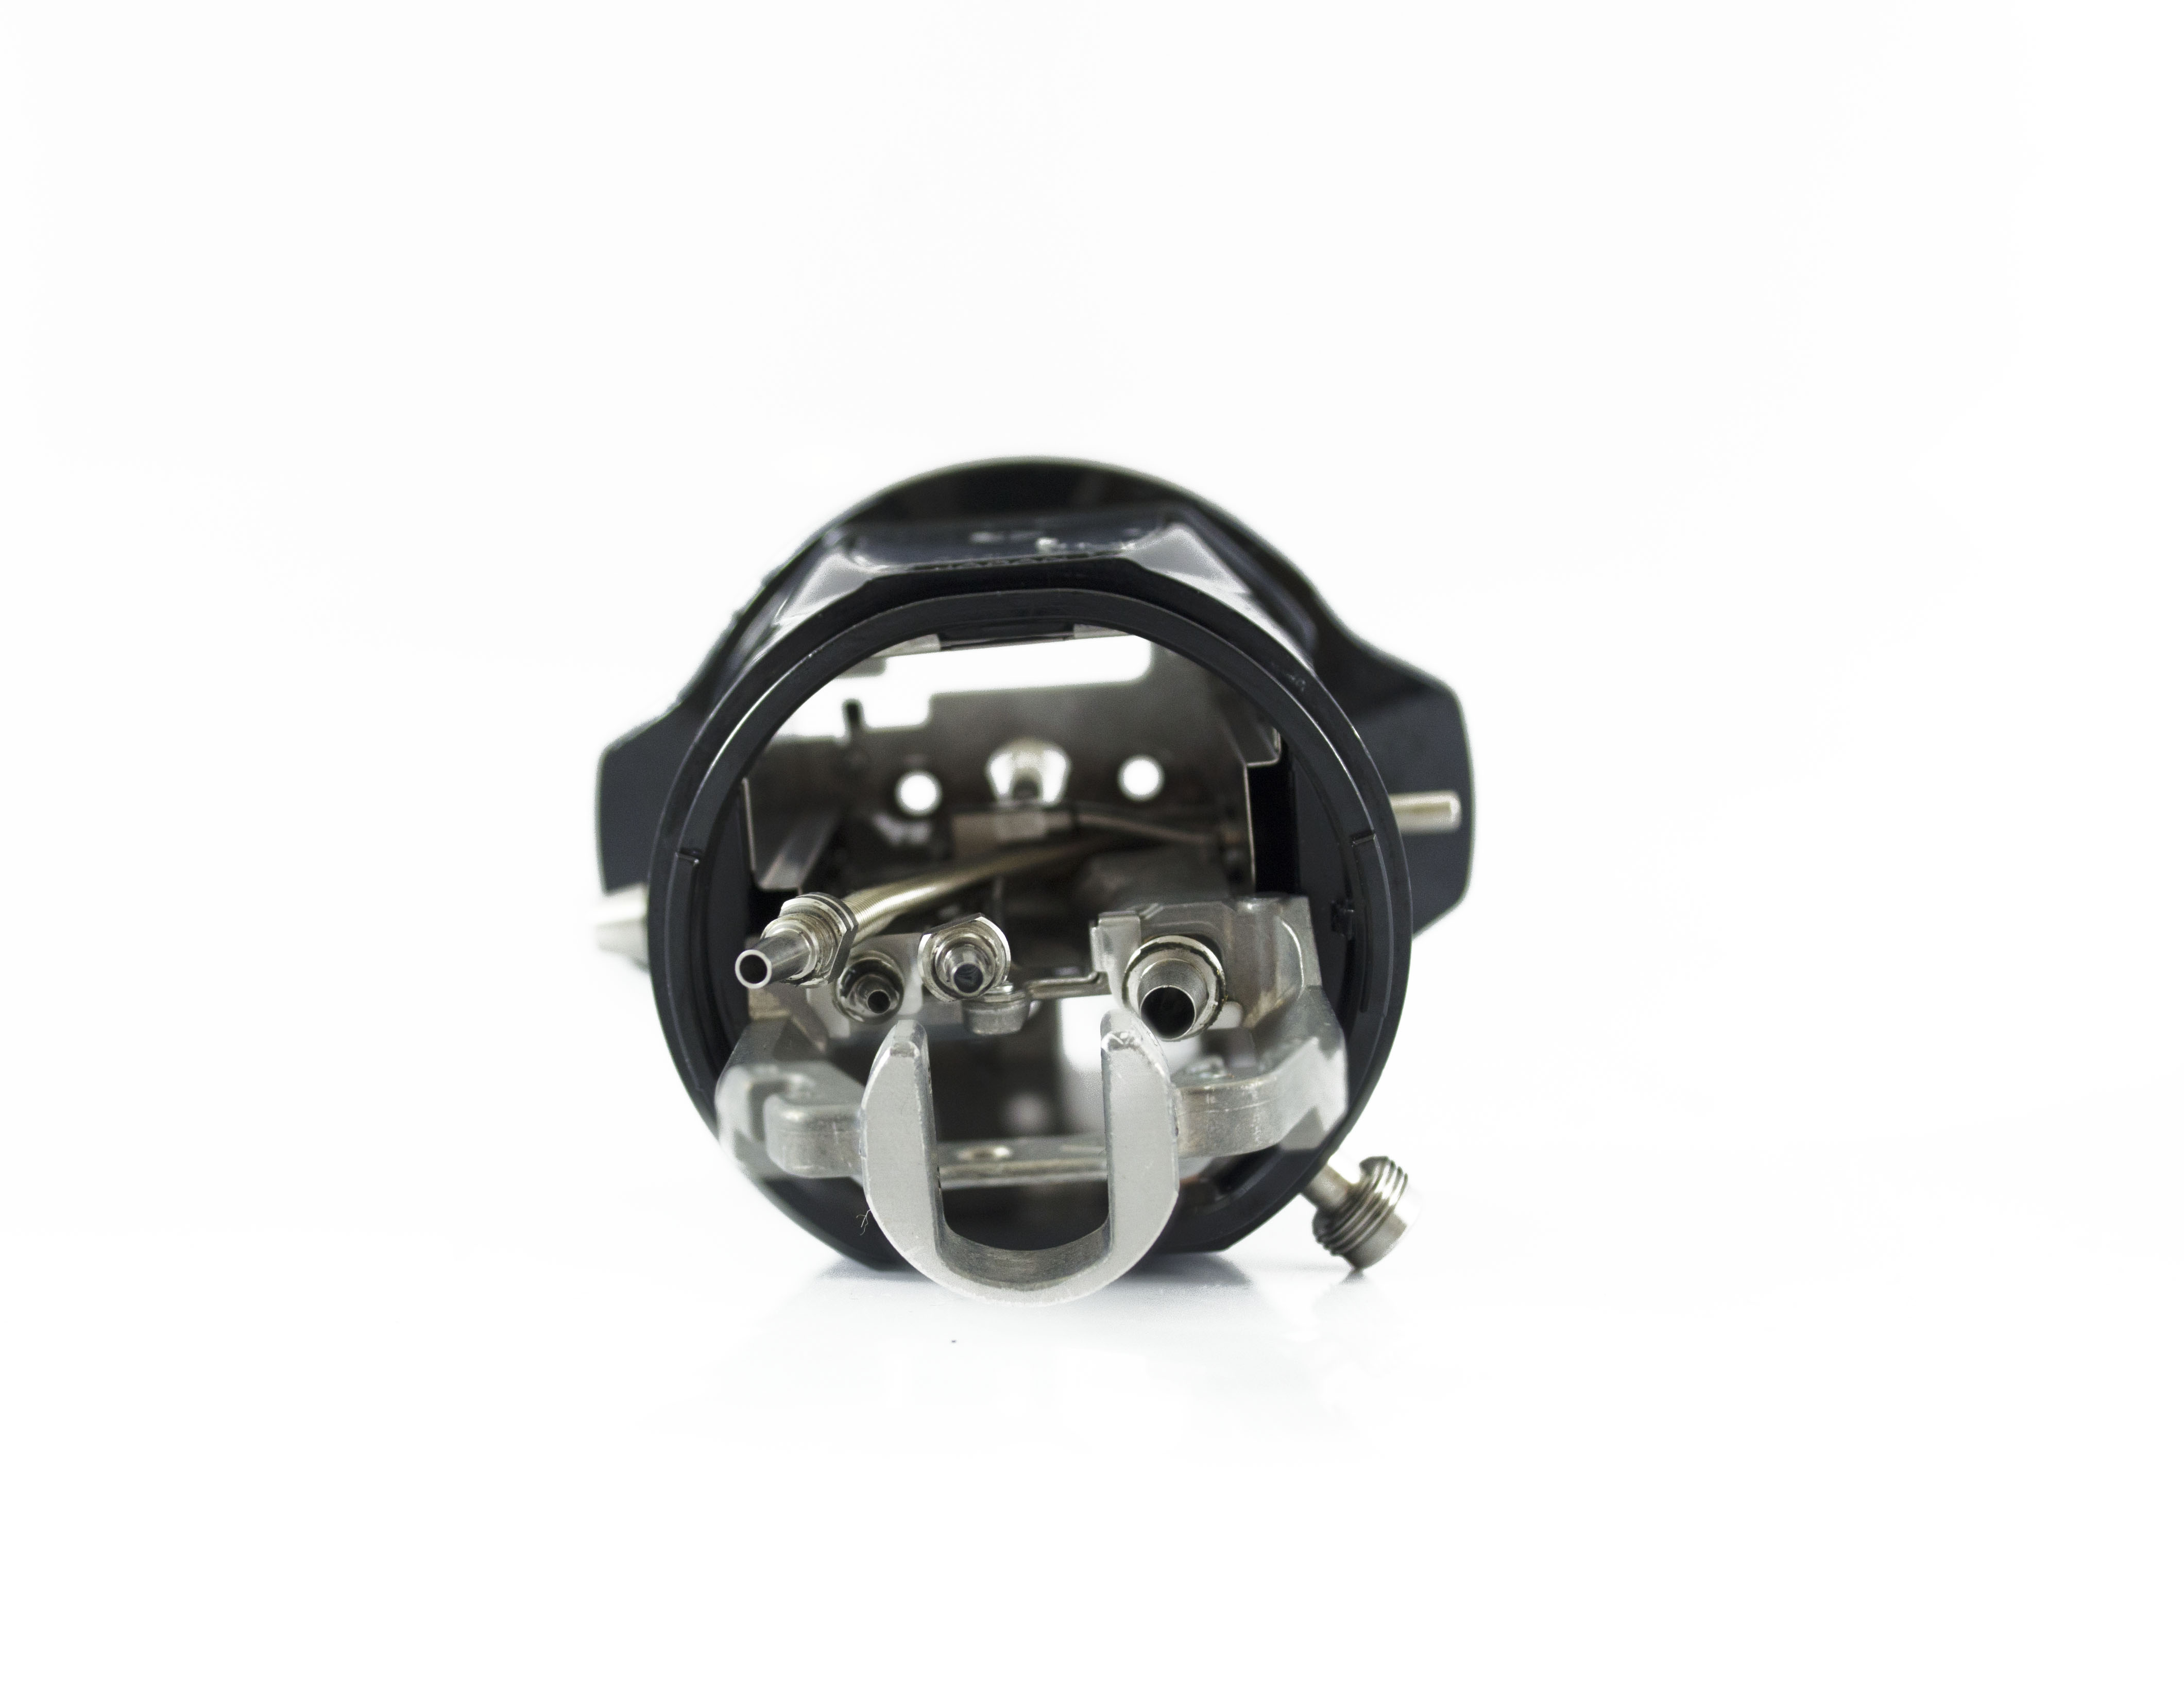 OEM Electrical Connector Housing - (J-Type) CF-HQ190L, GIF-HQ190, GIF-H190, PCF-H190L, PCF-H190DL